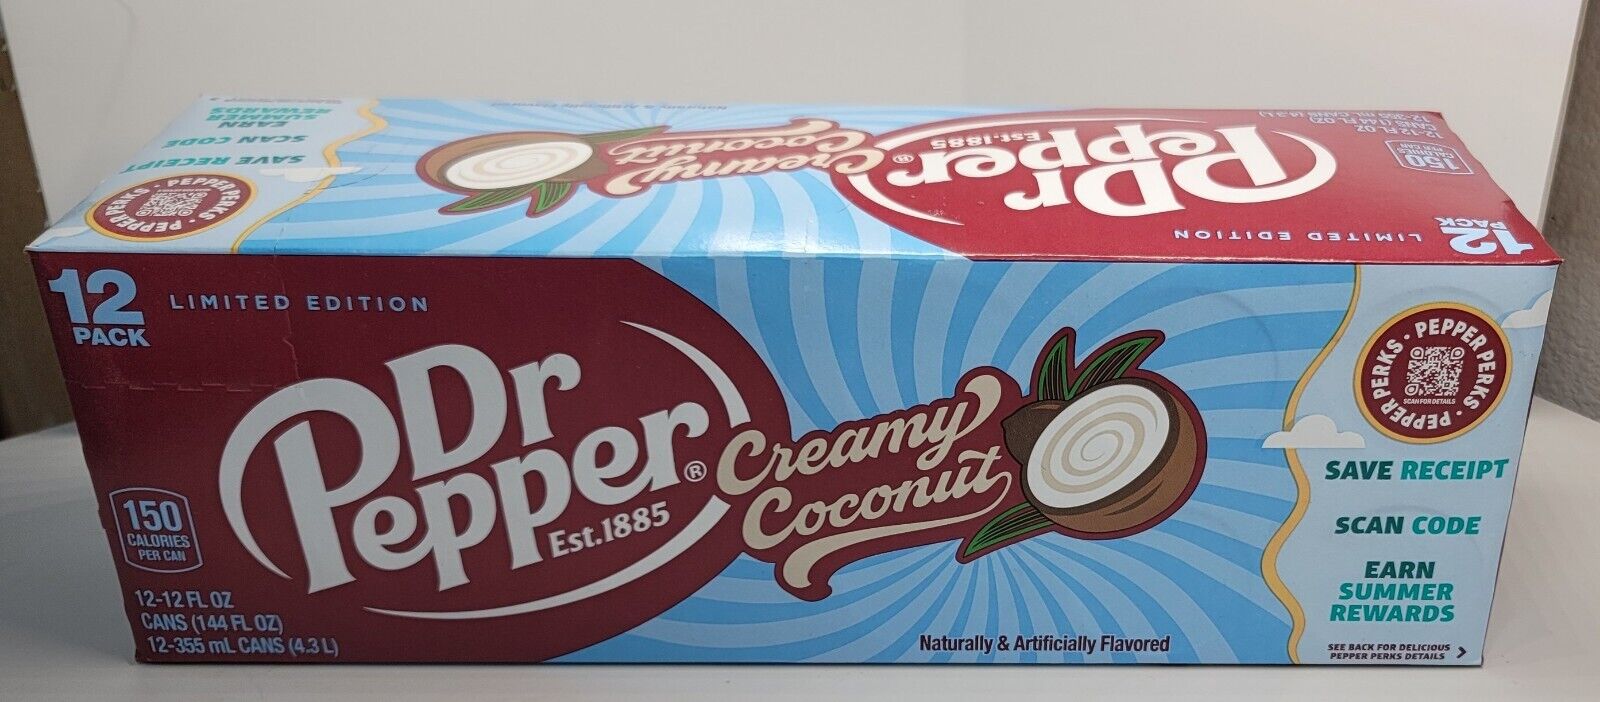 NEW LIMITED ED DR PEPPER CREAMY COCONUT FLAVOR SODA 12 PACK 12 FLOZ (355mL) CANS